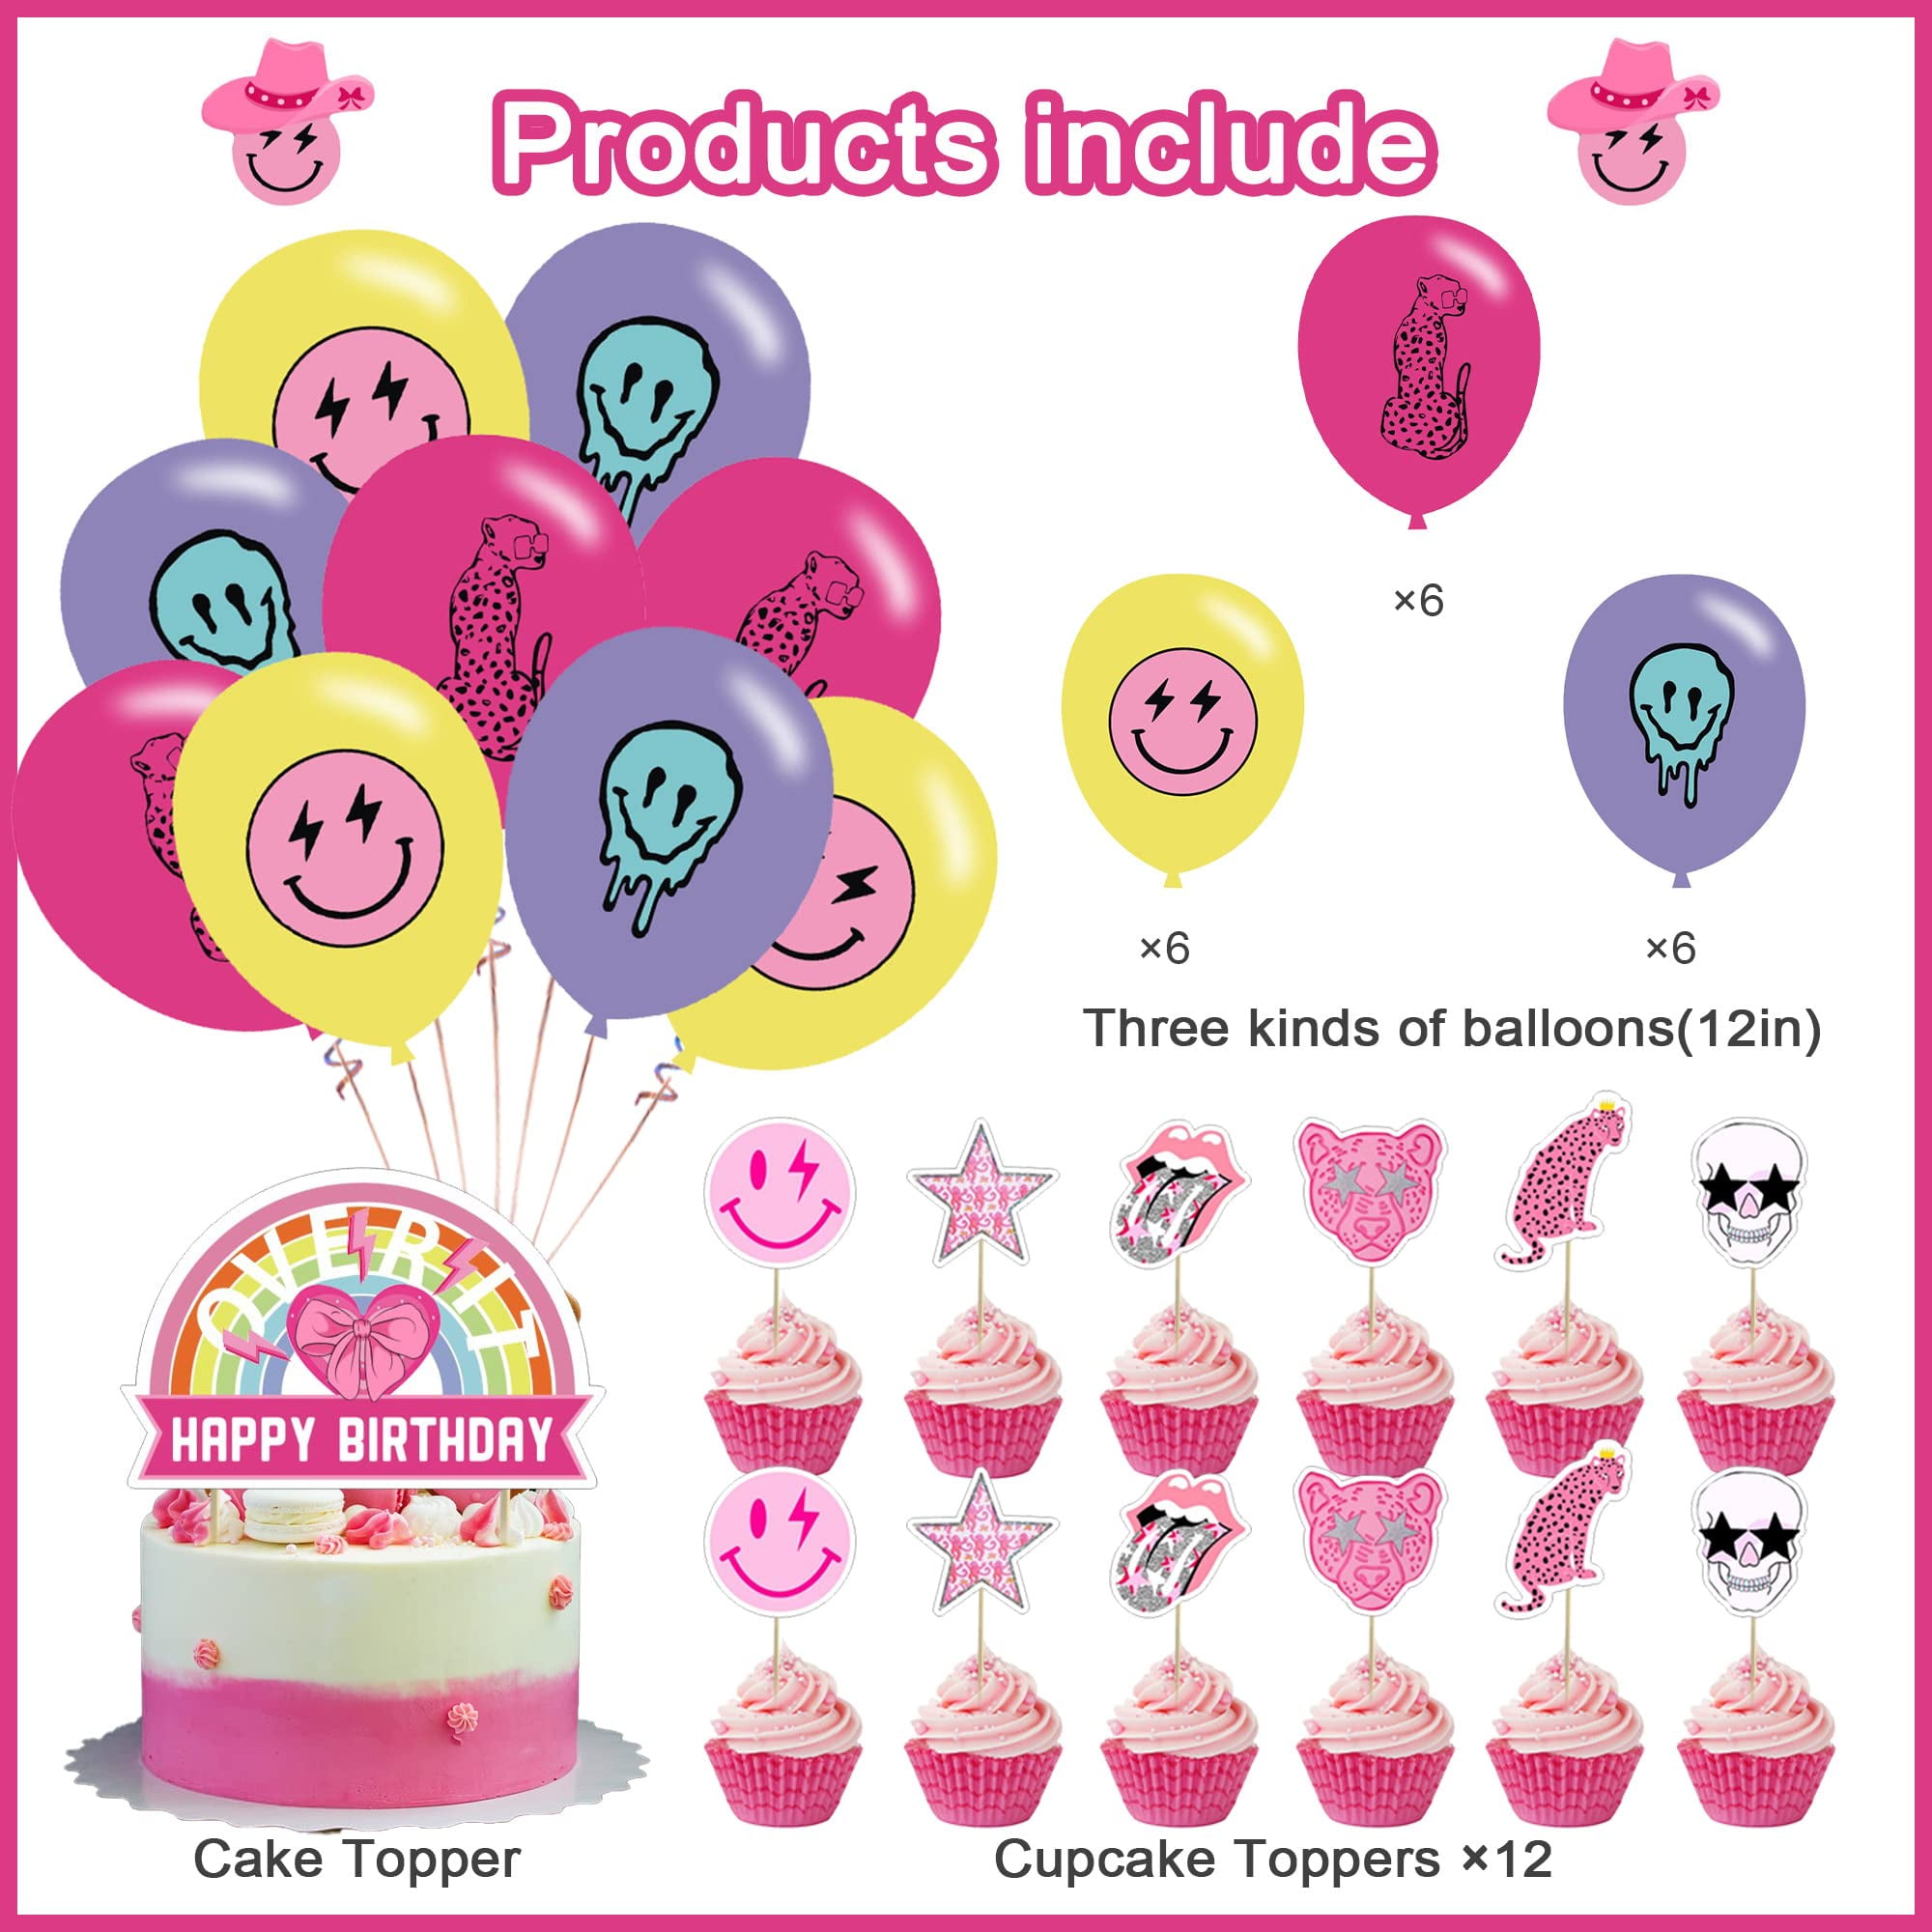 Preppy Style Party Supplies, Preppy Birthday Party Decoration included Banner, Balloon, Cake Toppers, 50pcs Stickers for Preppy Smile Happy Face Party Decor - Walmart.com